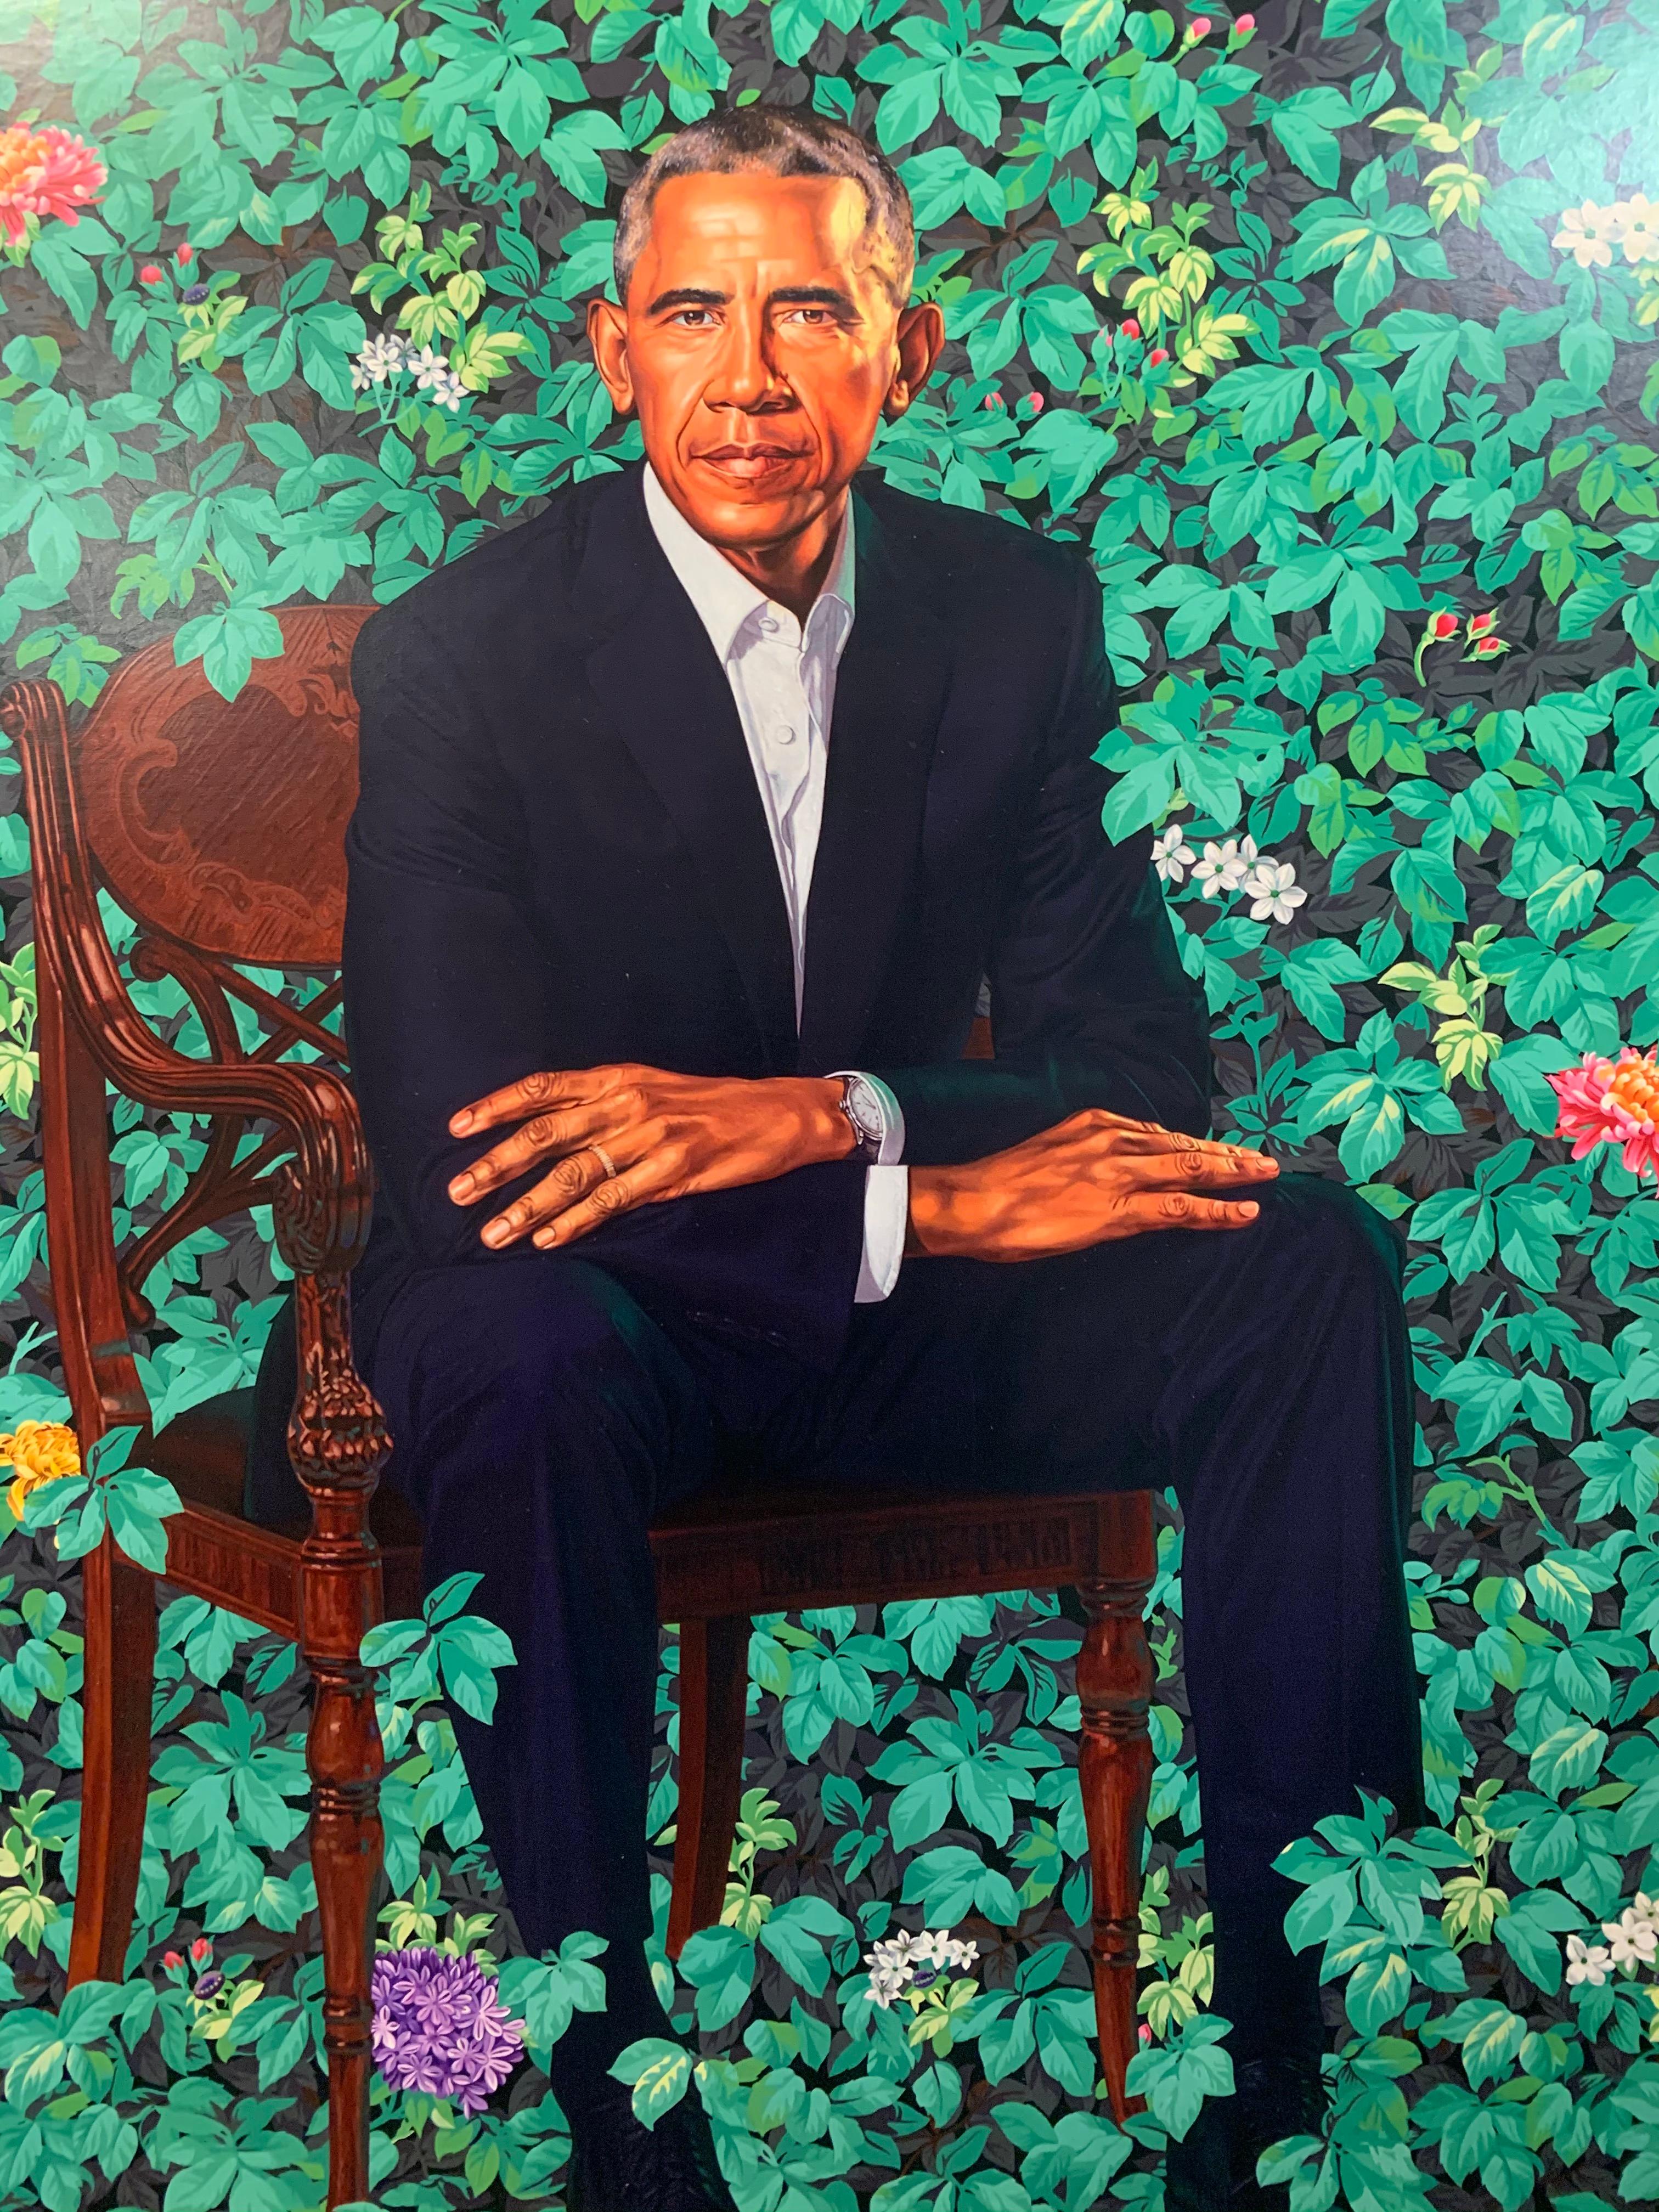 Barack Obama White House Portrait - Print by Kehinde Wiley